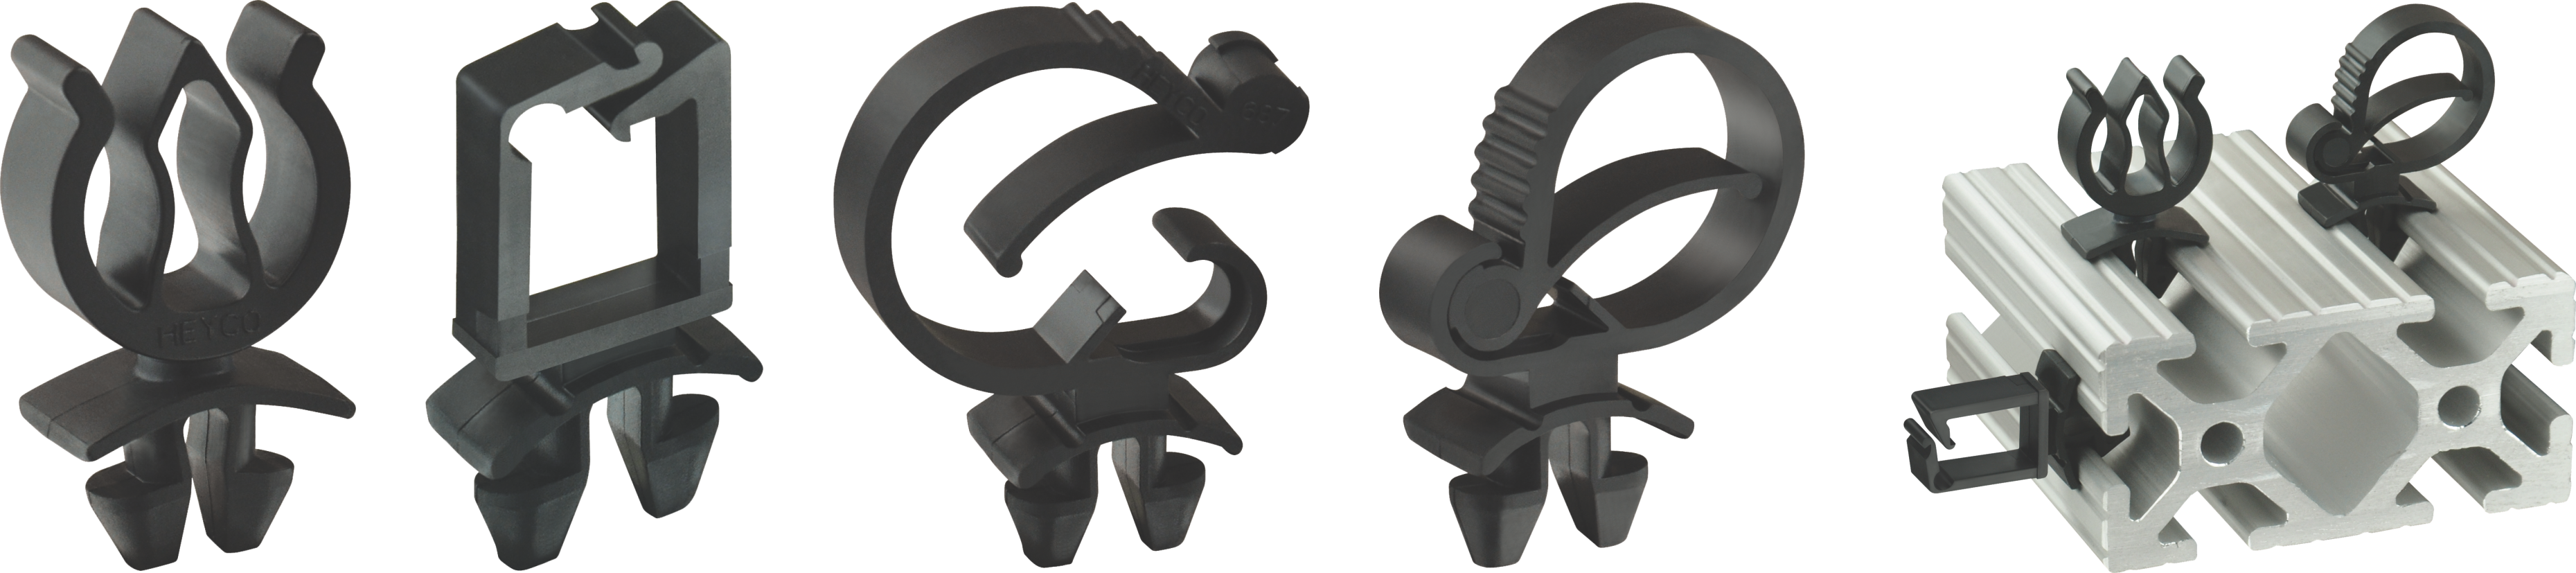 Heyco® Quarter-Turn Mount Wire Clips